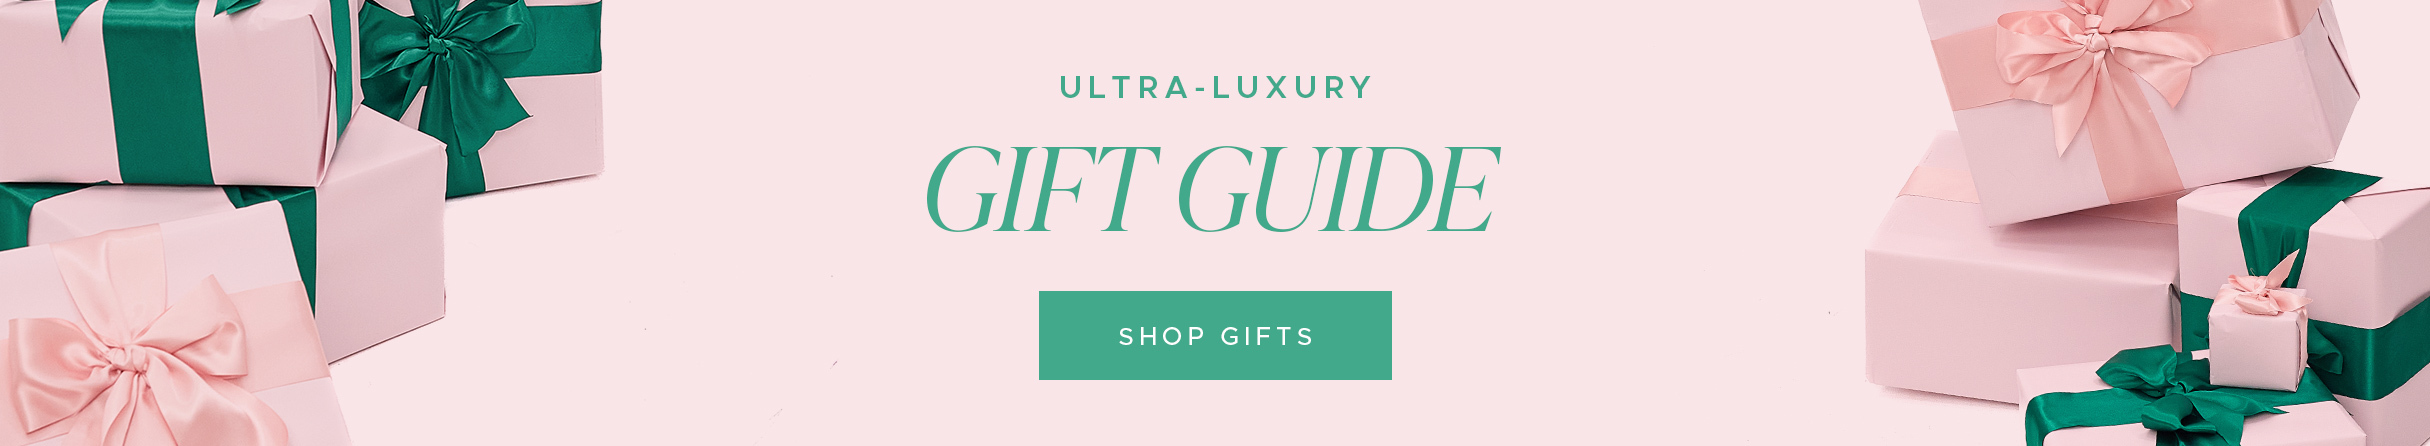 Selling Ultra-Luxury Accessories? Here's Where To Start